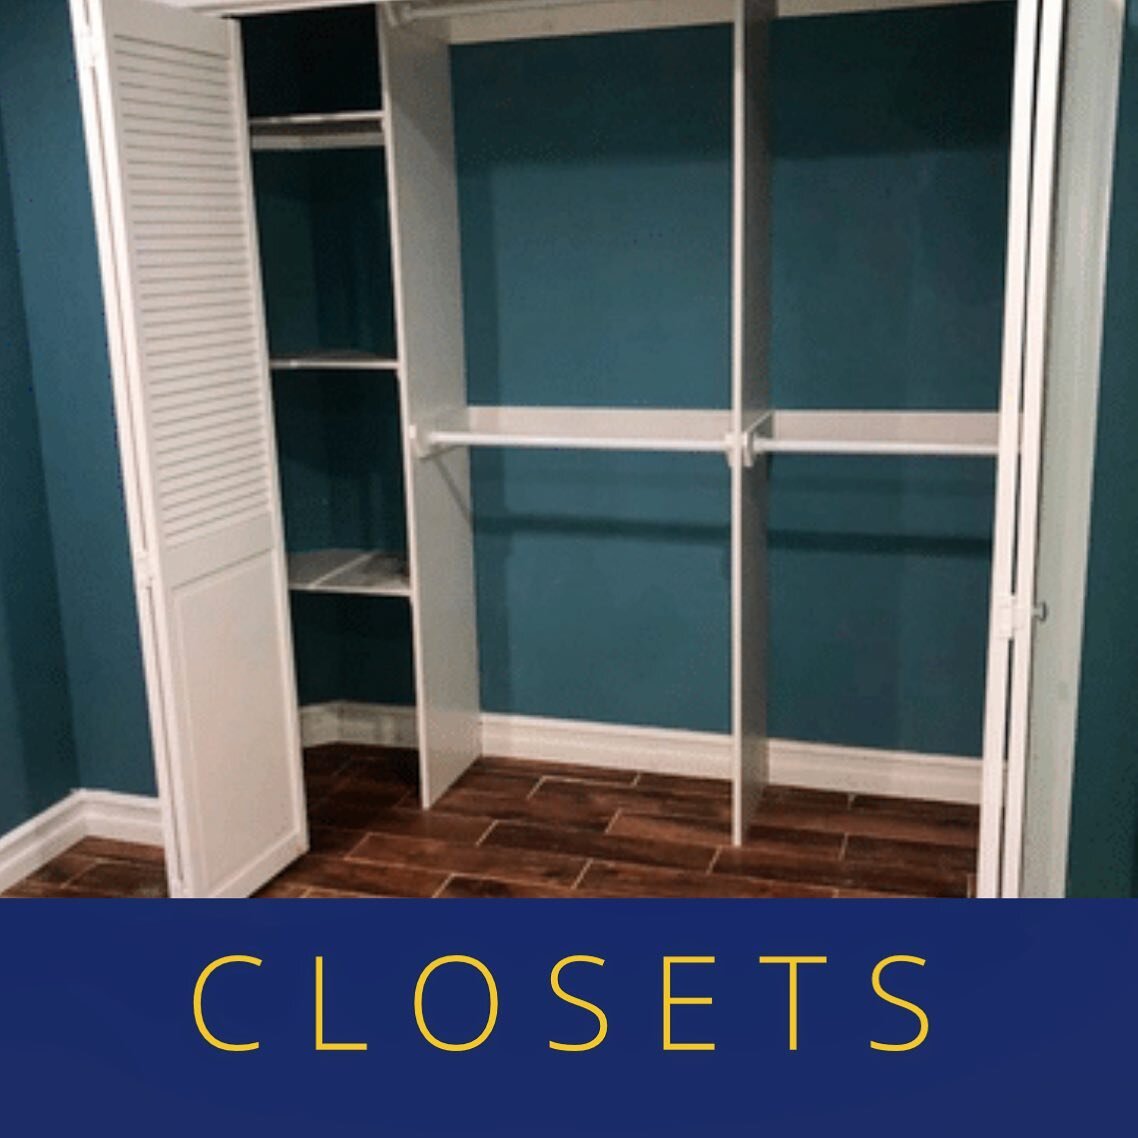 Make the most of your closet! Closet makeovers are affordable and fast. Contact us via DM or through our website for a quote. 

✅ Sustainable Design 
✅ High Quality Materials
✅ Weather Durable 

Follow:
@maldinidesignconstruction 
@maldinidesignconst